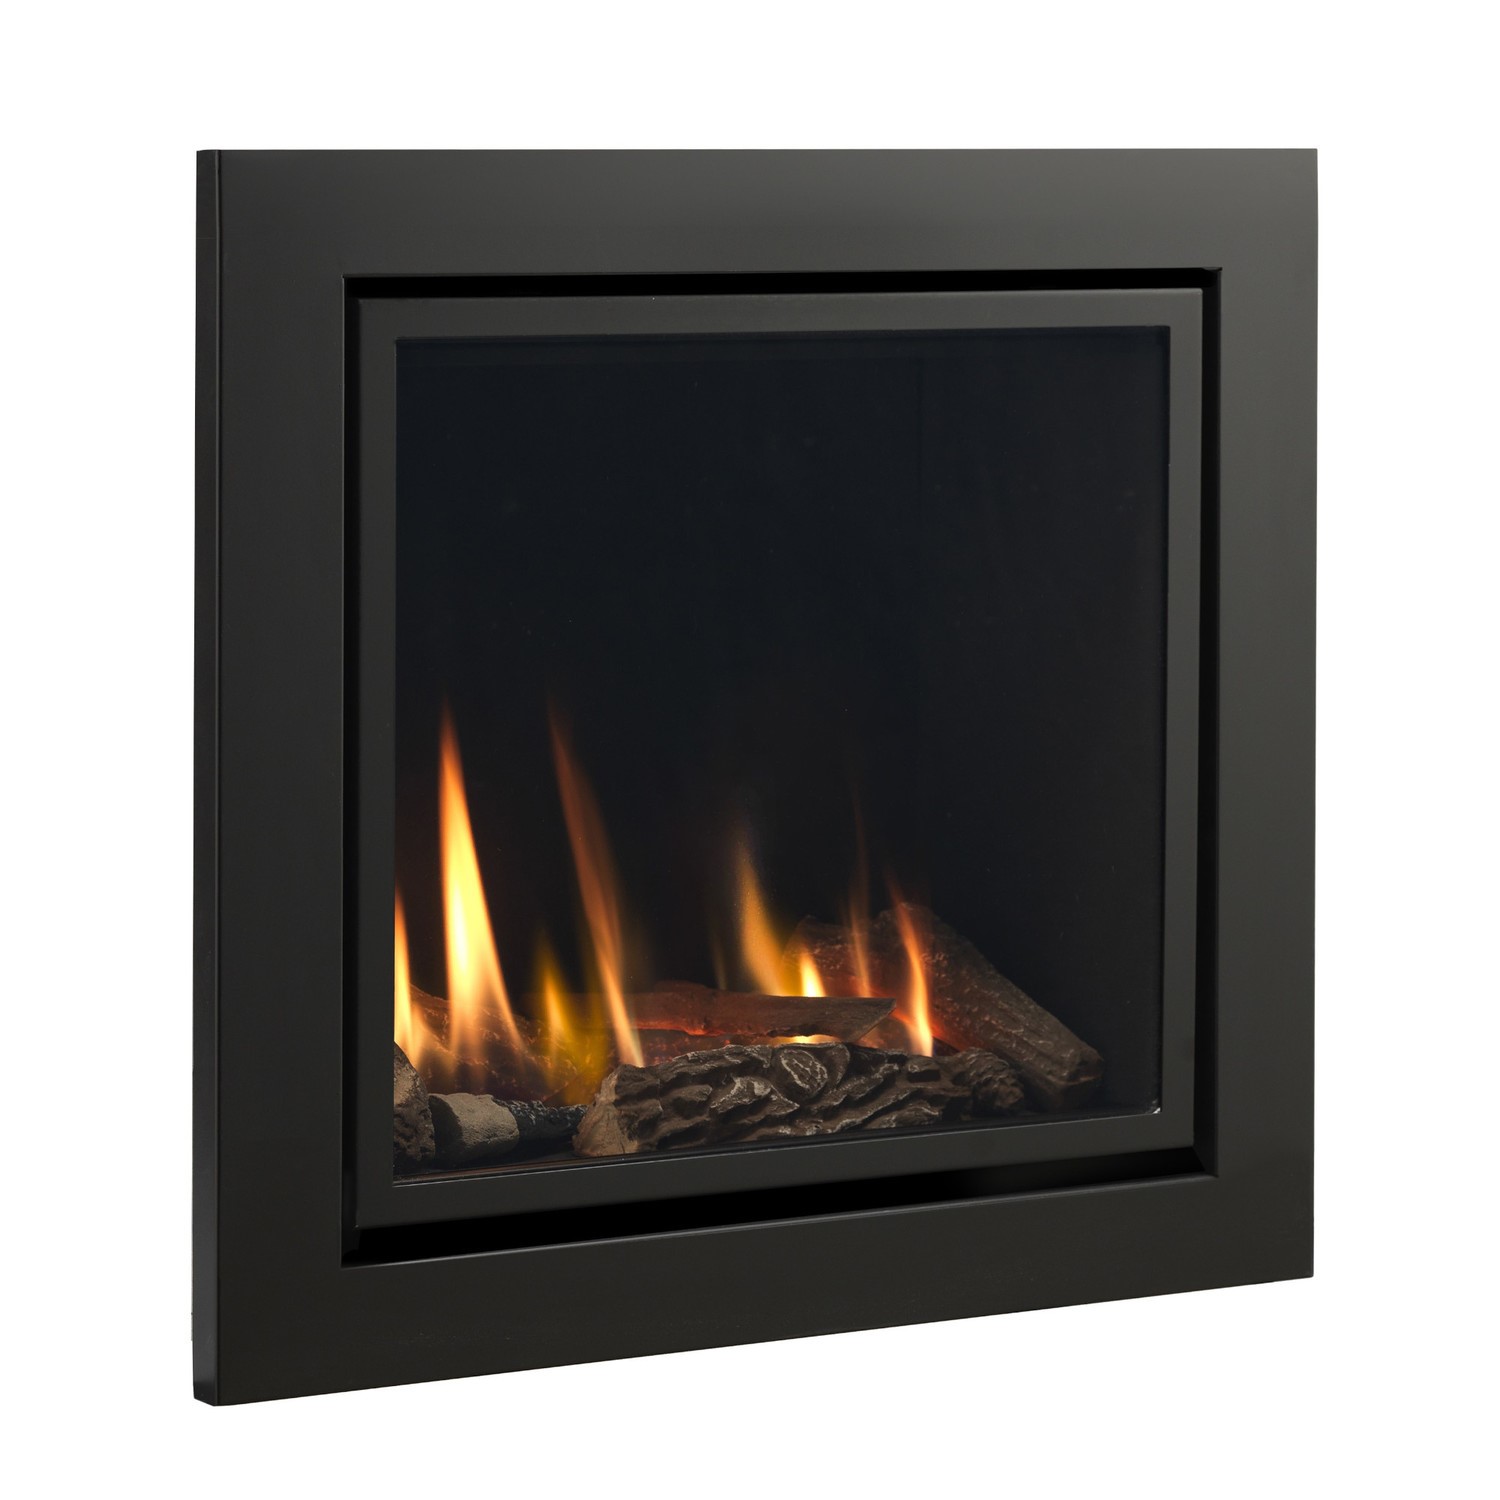 Read more about 6 x 6 inset gas fire with logs vola